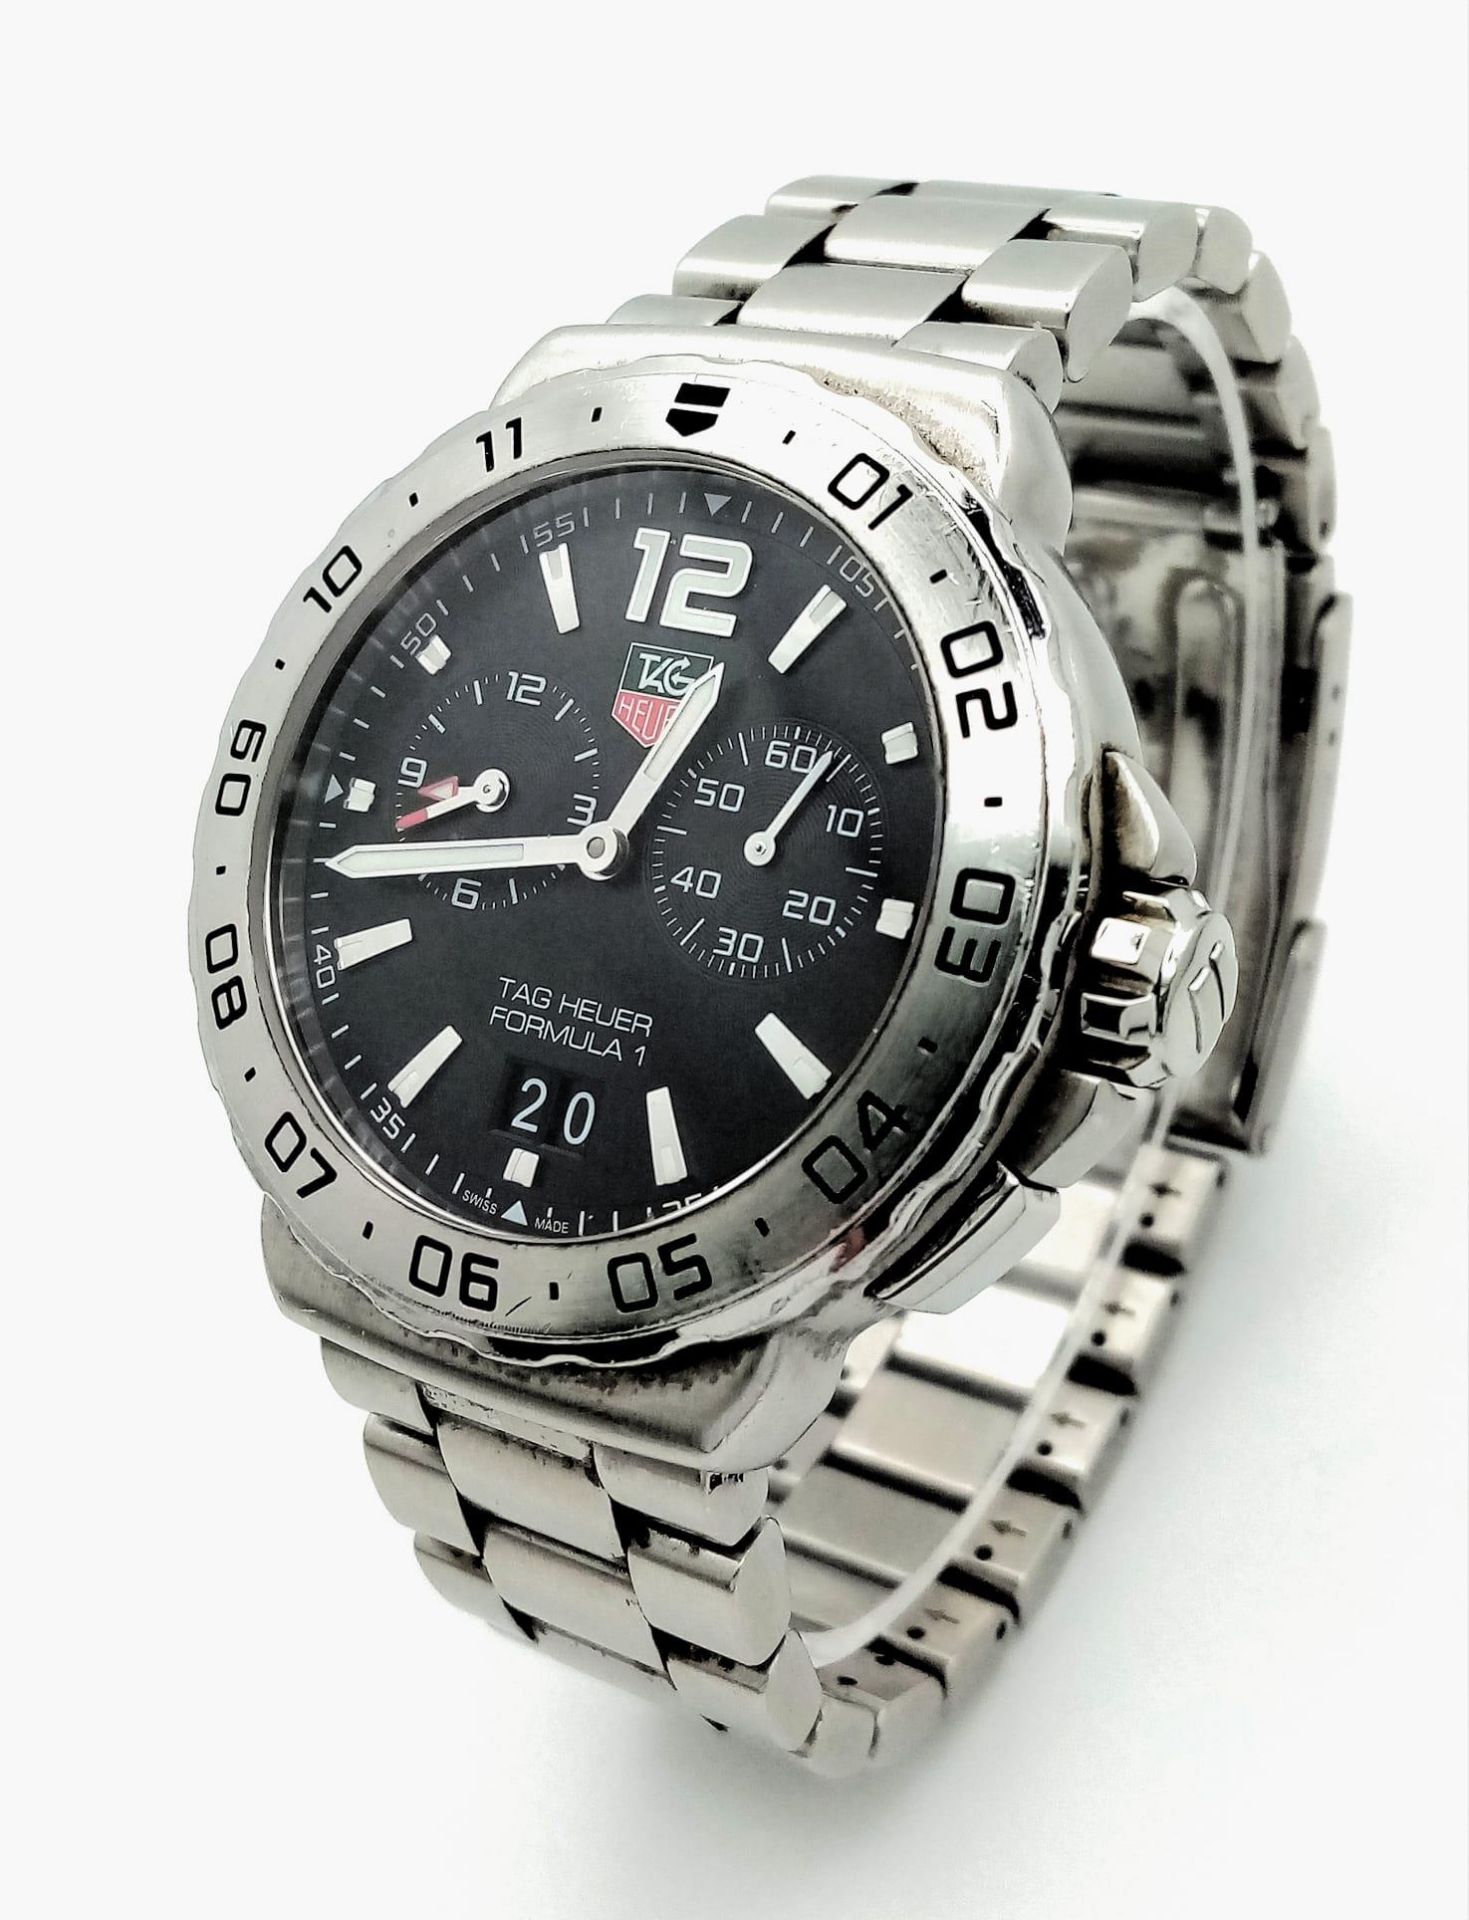 A Tag Heuer Formula 1 Gents Alarm Watch. Stainless steel bracelet and case - 42mm. Black dial with